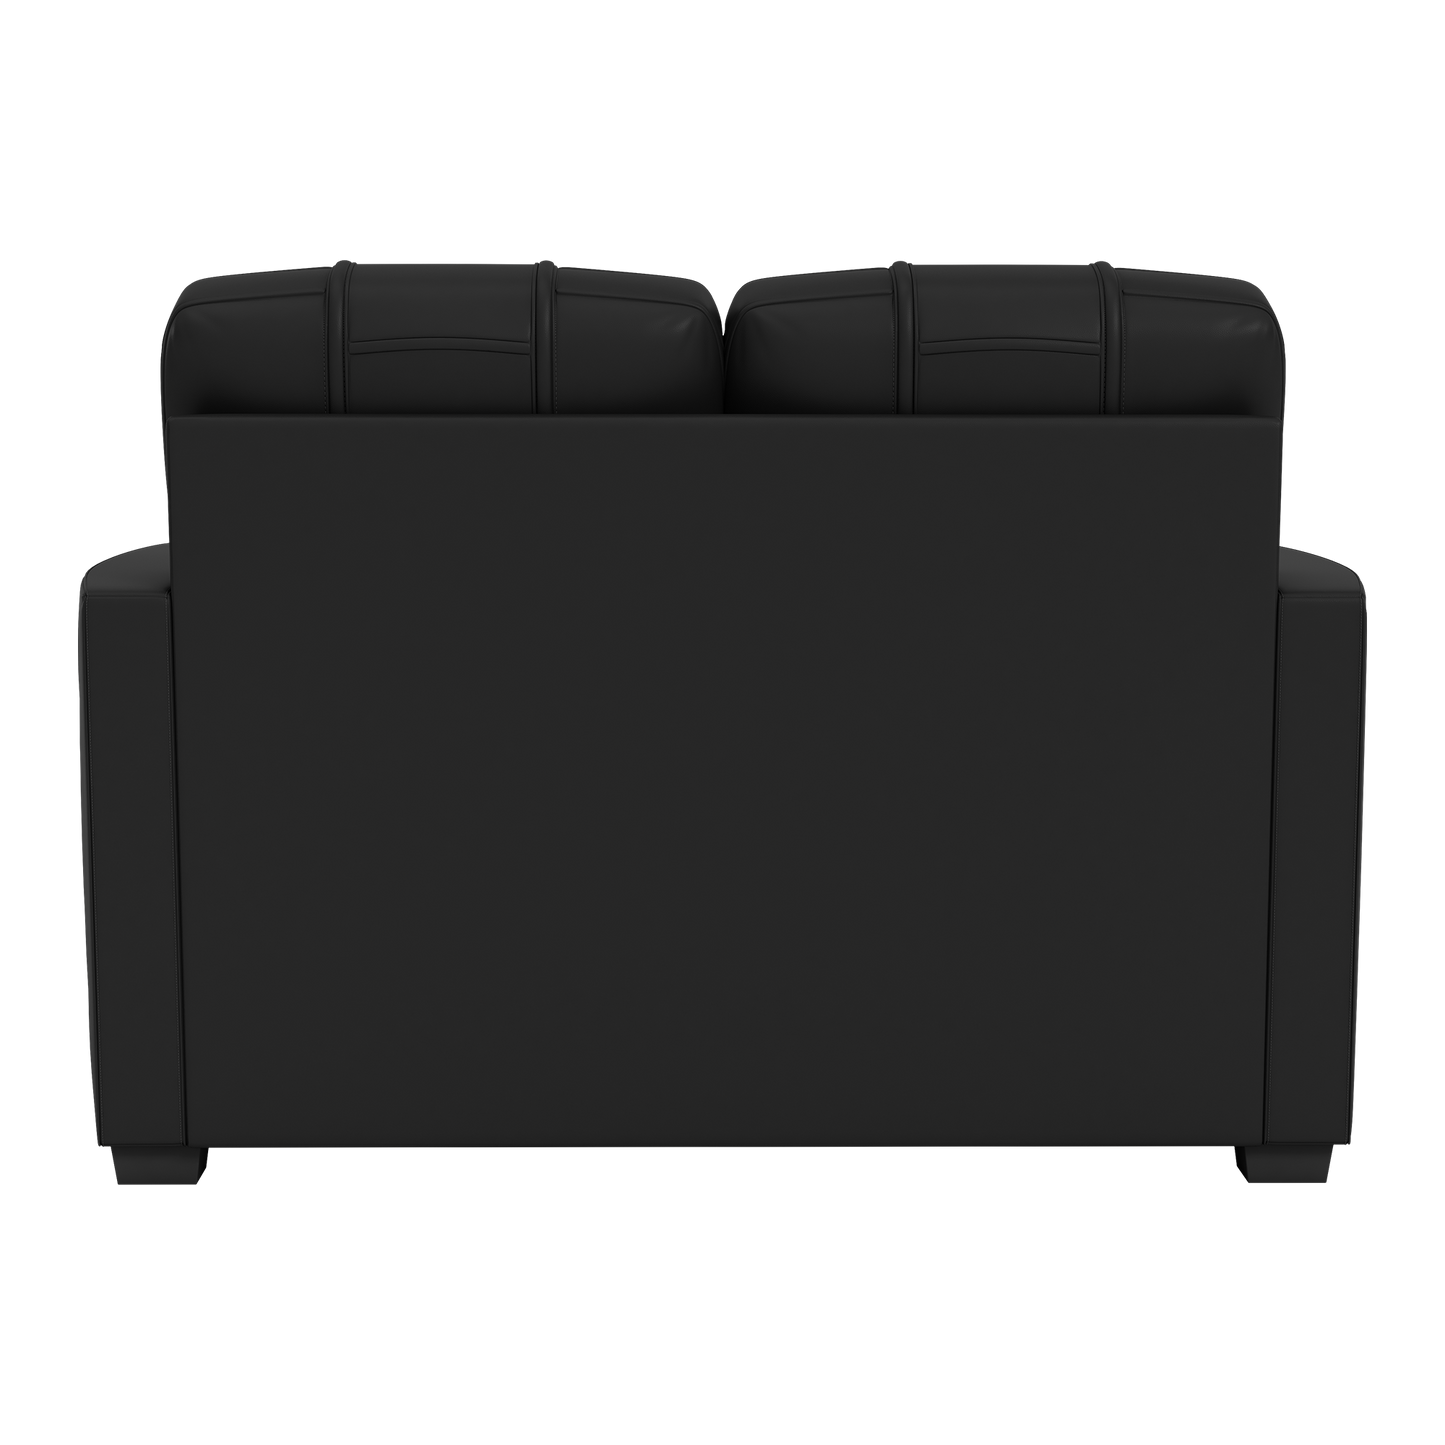 Xcalibur Stationary Loveseat - Top Grain Leather (Blank or Stock Logo)